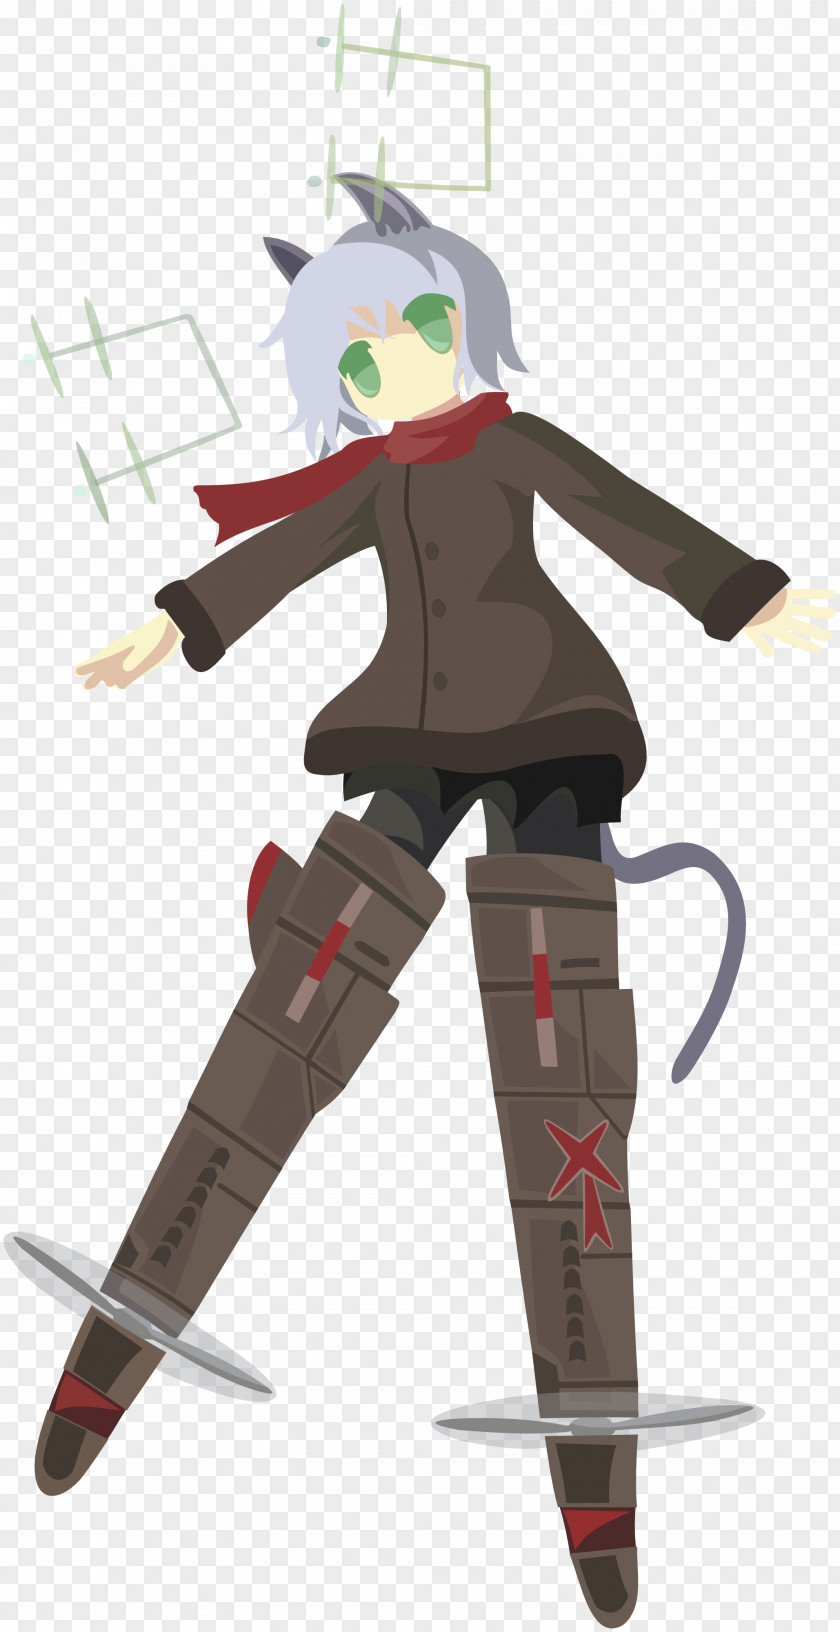 Design Character Weapon PNG